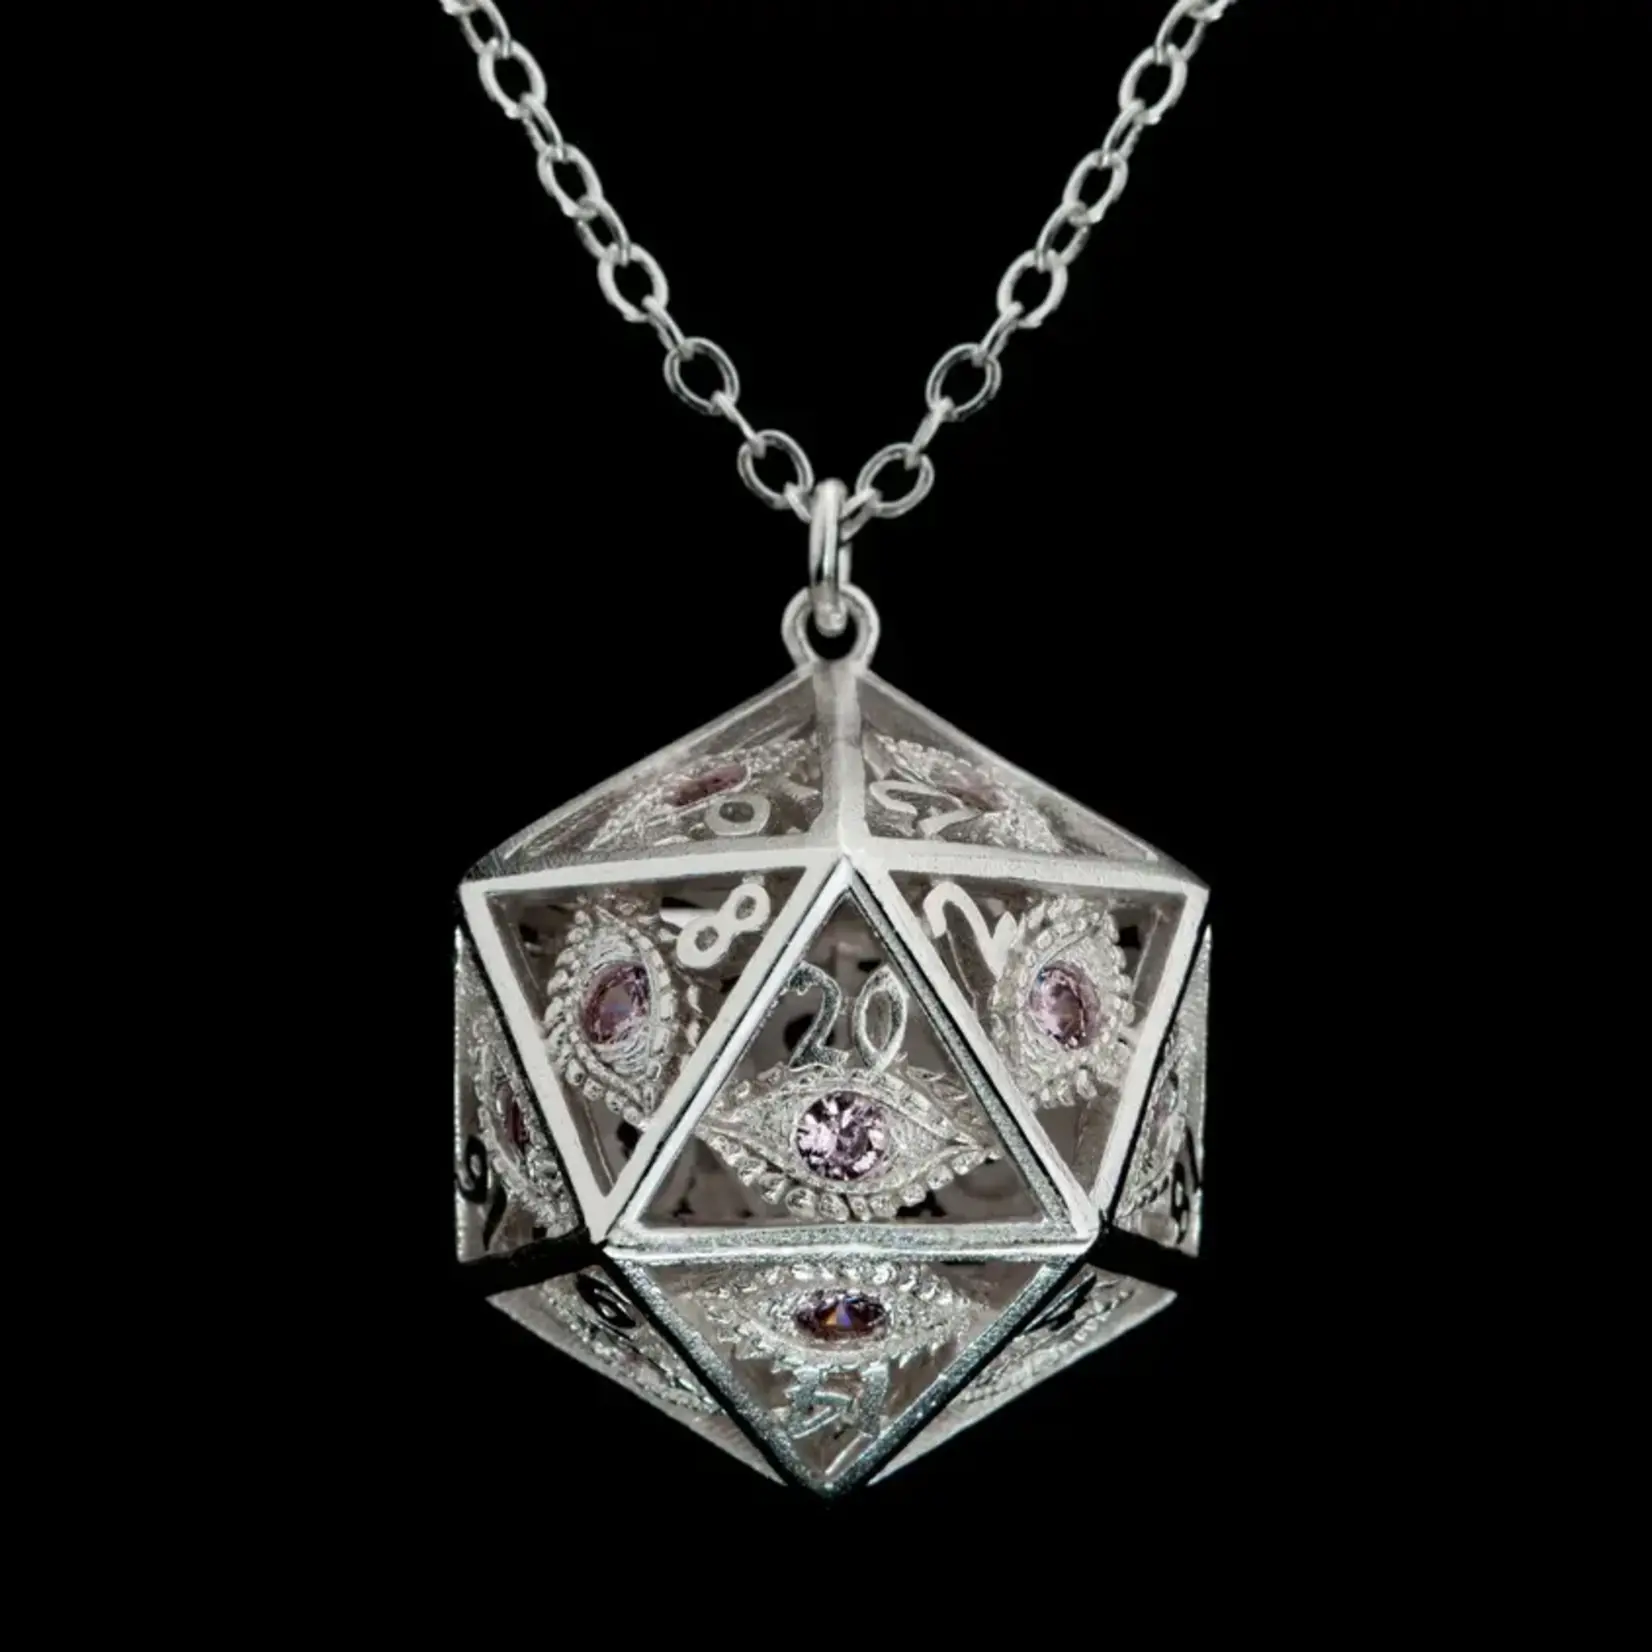 D20 Necklace With Silver Hue Chain (Borealis Smoke Black D20)